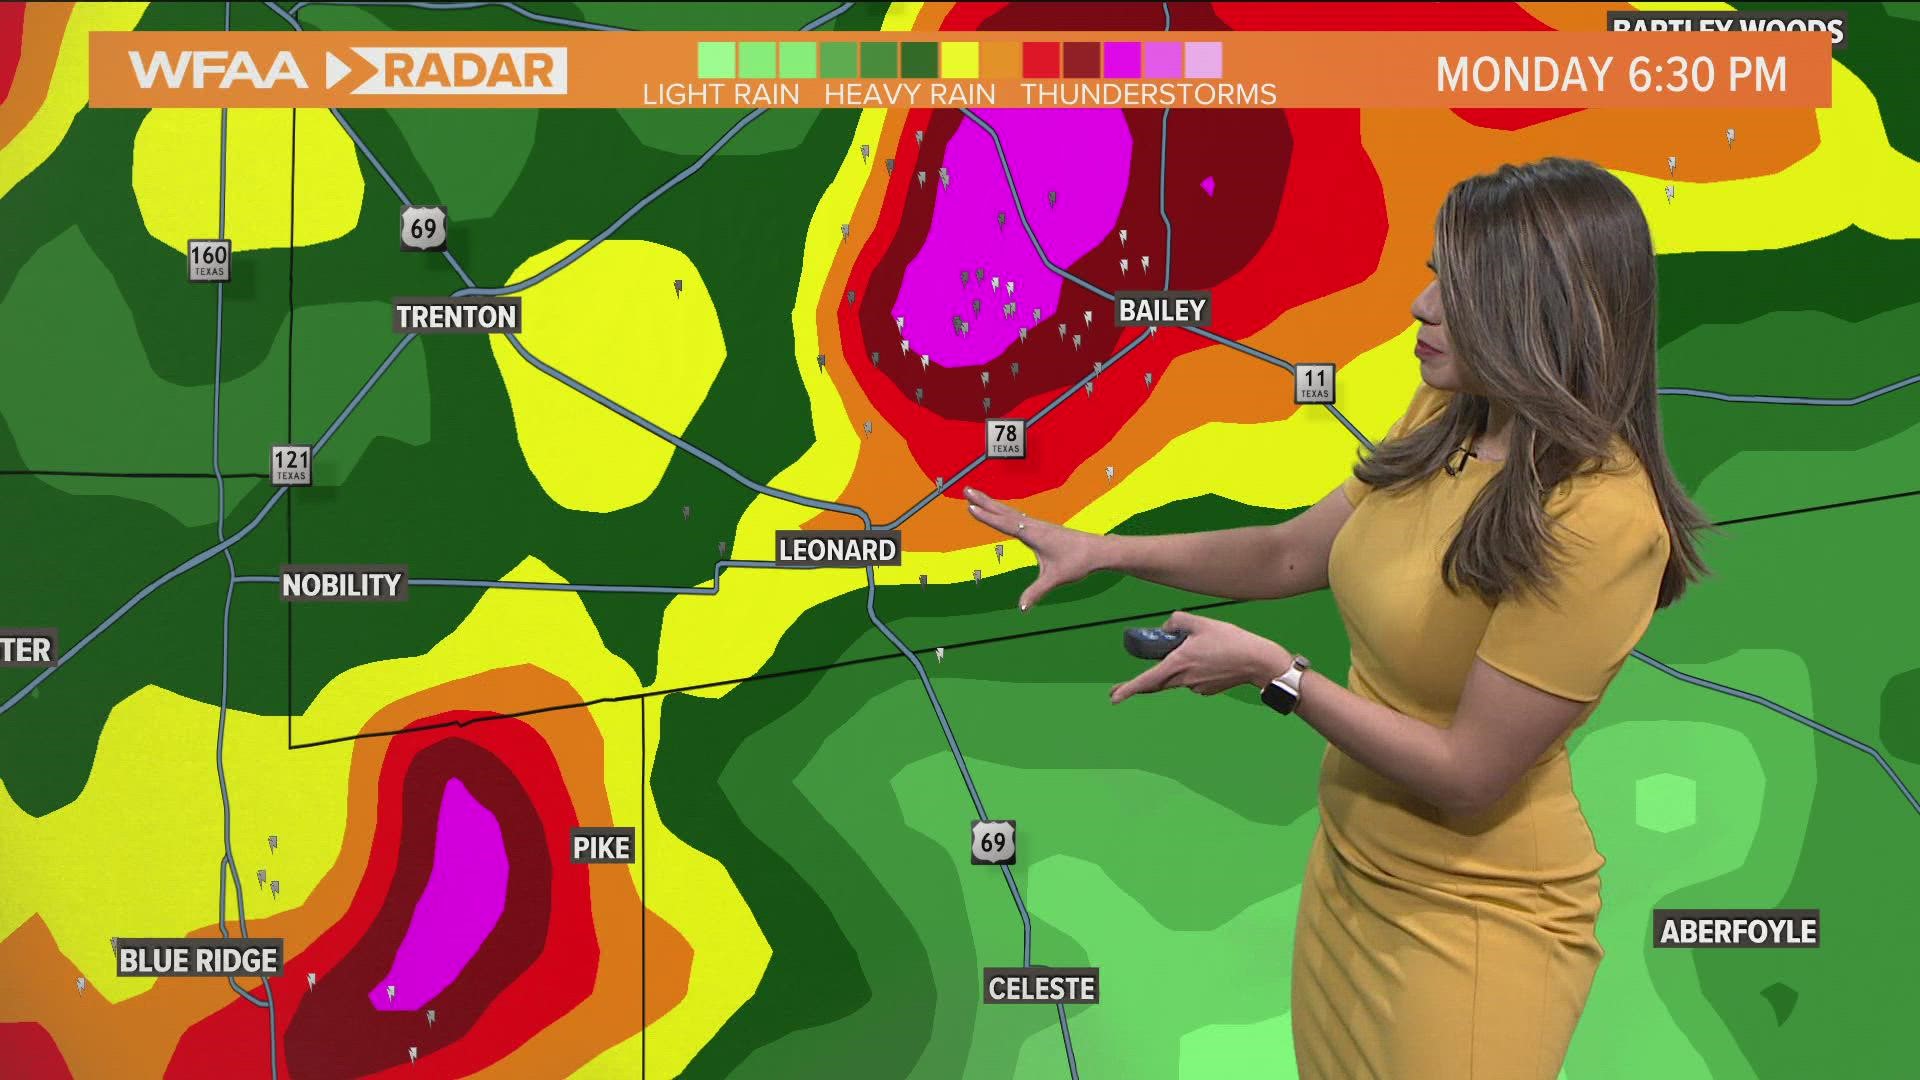 Here's a look at the storm that went through Leonard, Texas, and produced a possible tornado Monday night.